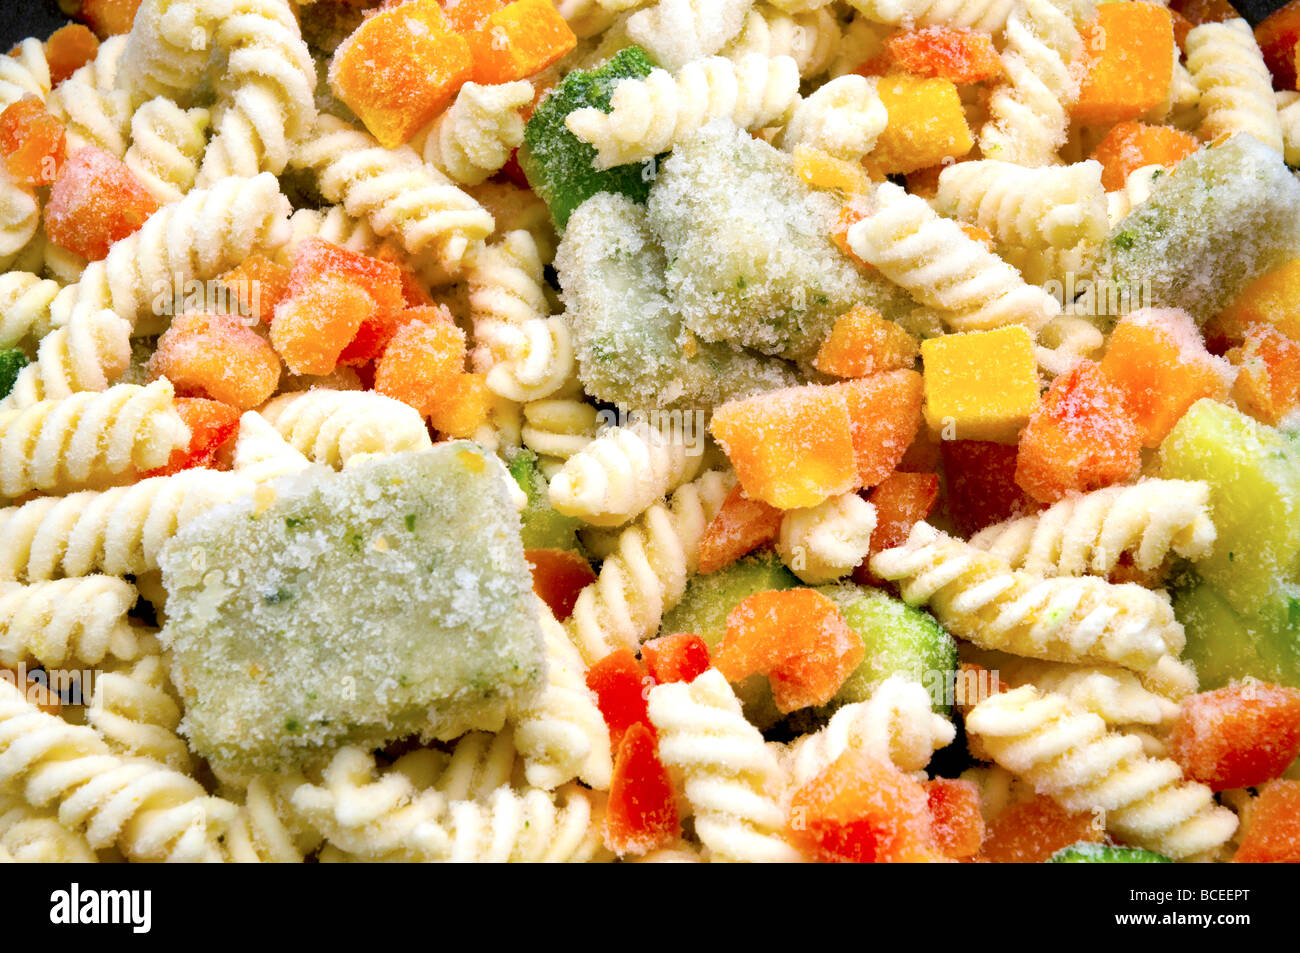 Frozen ready-cooked pasta Stock Photo